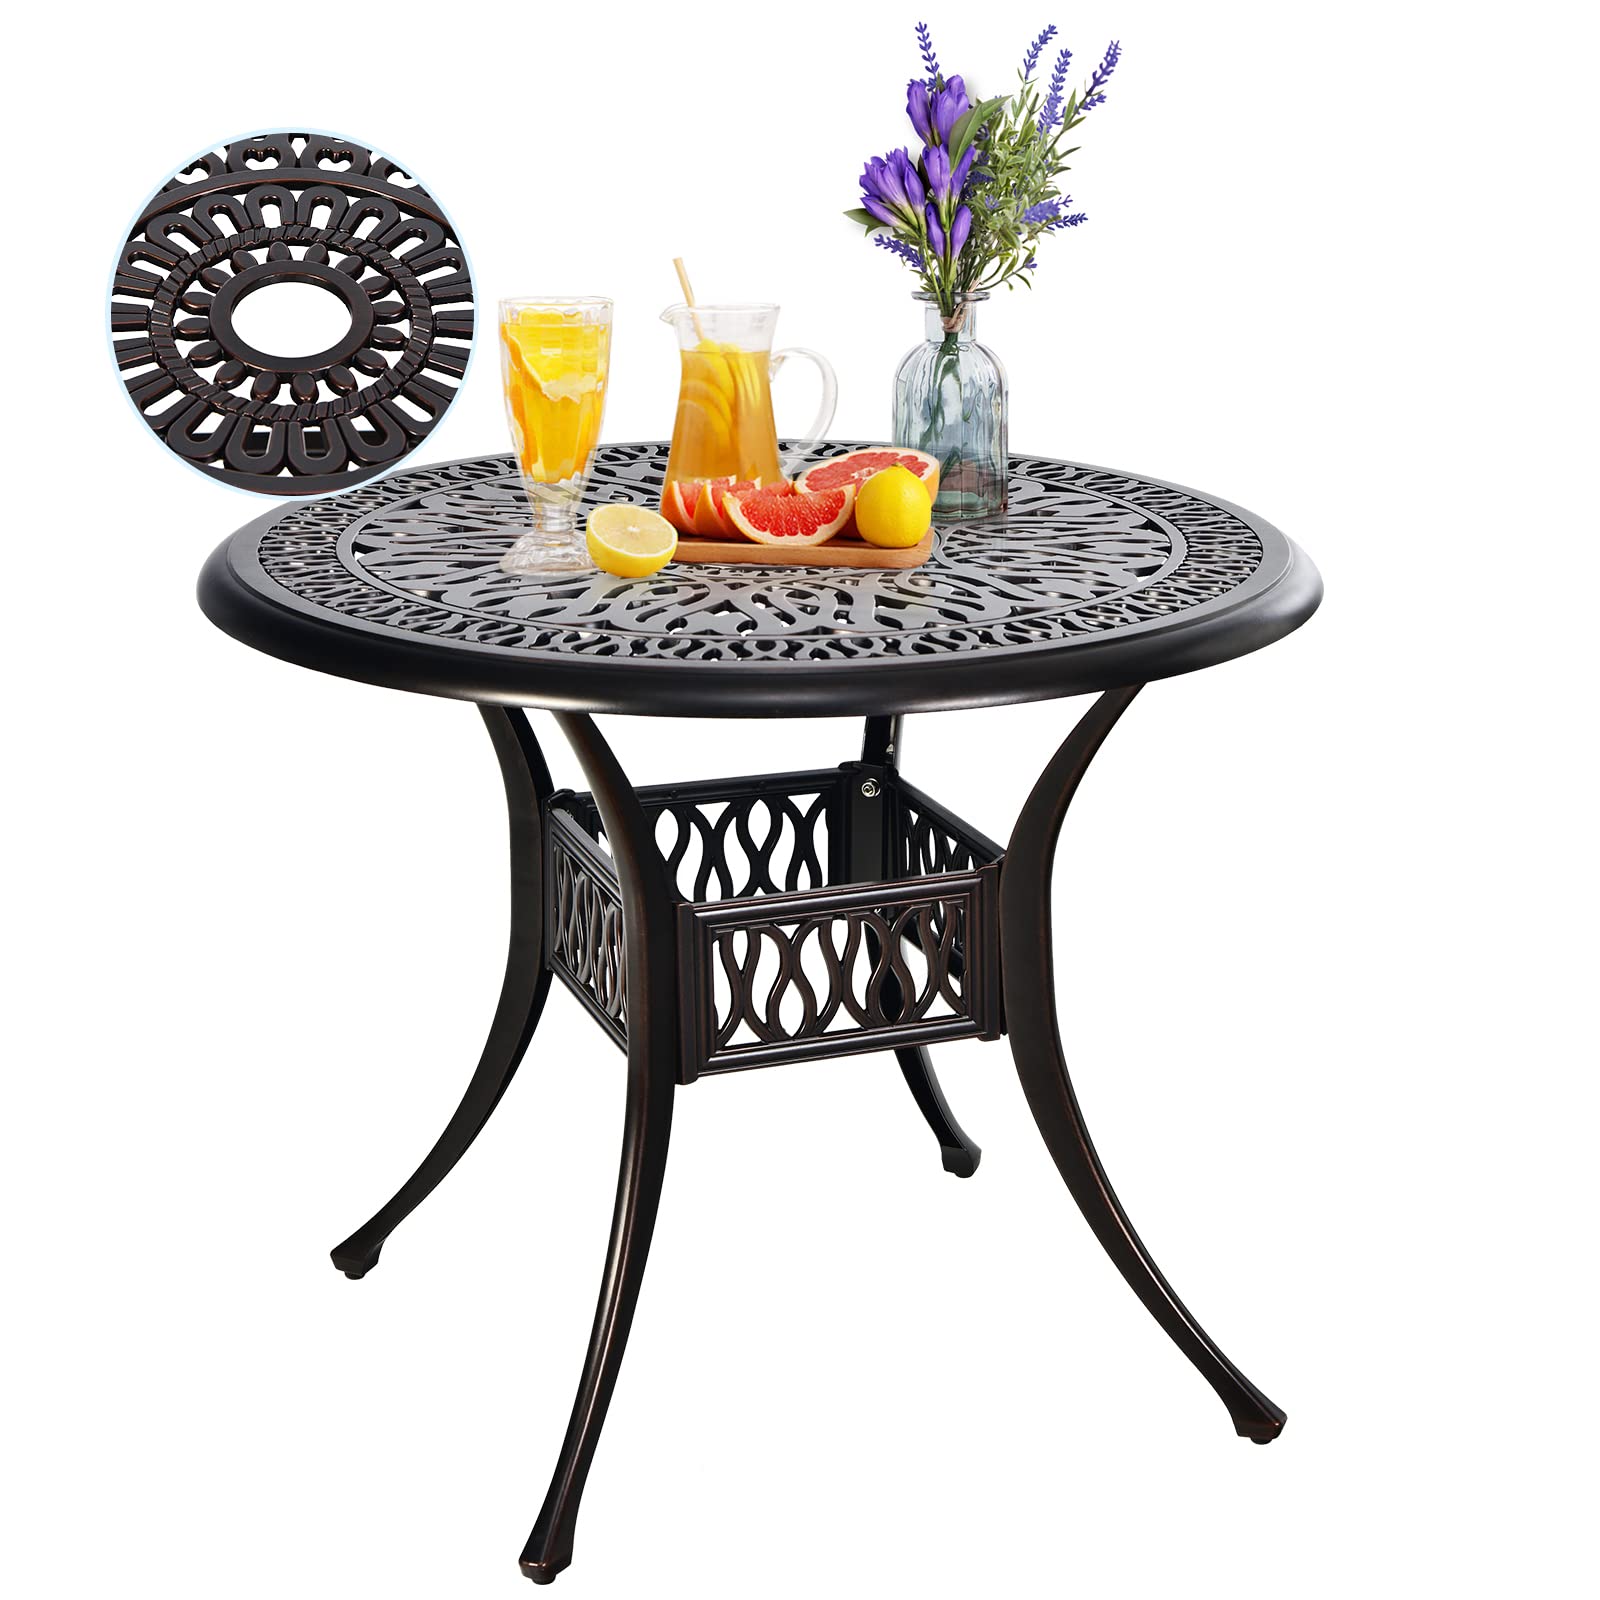 Giantex Bistro Table, Cast Aluminum Round Dining Table